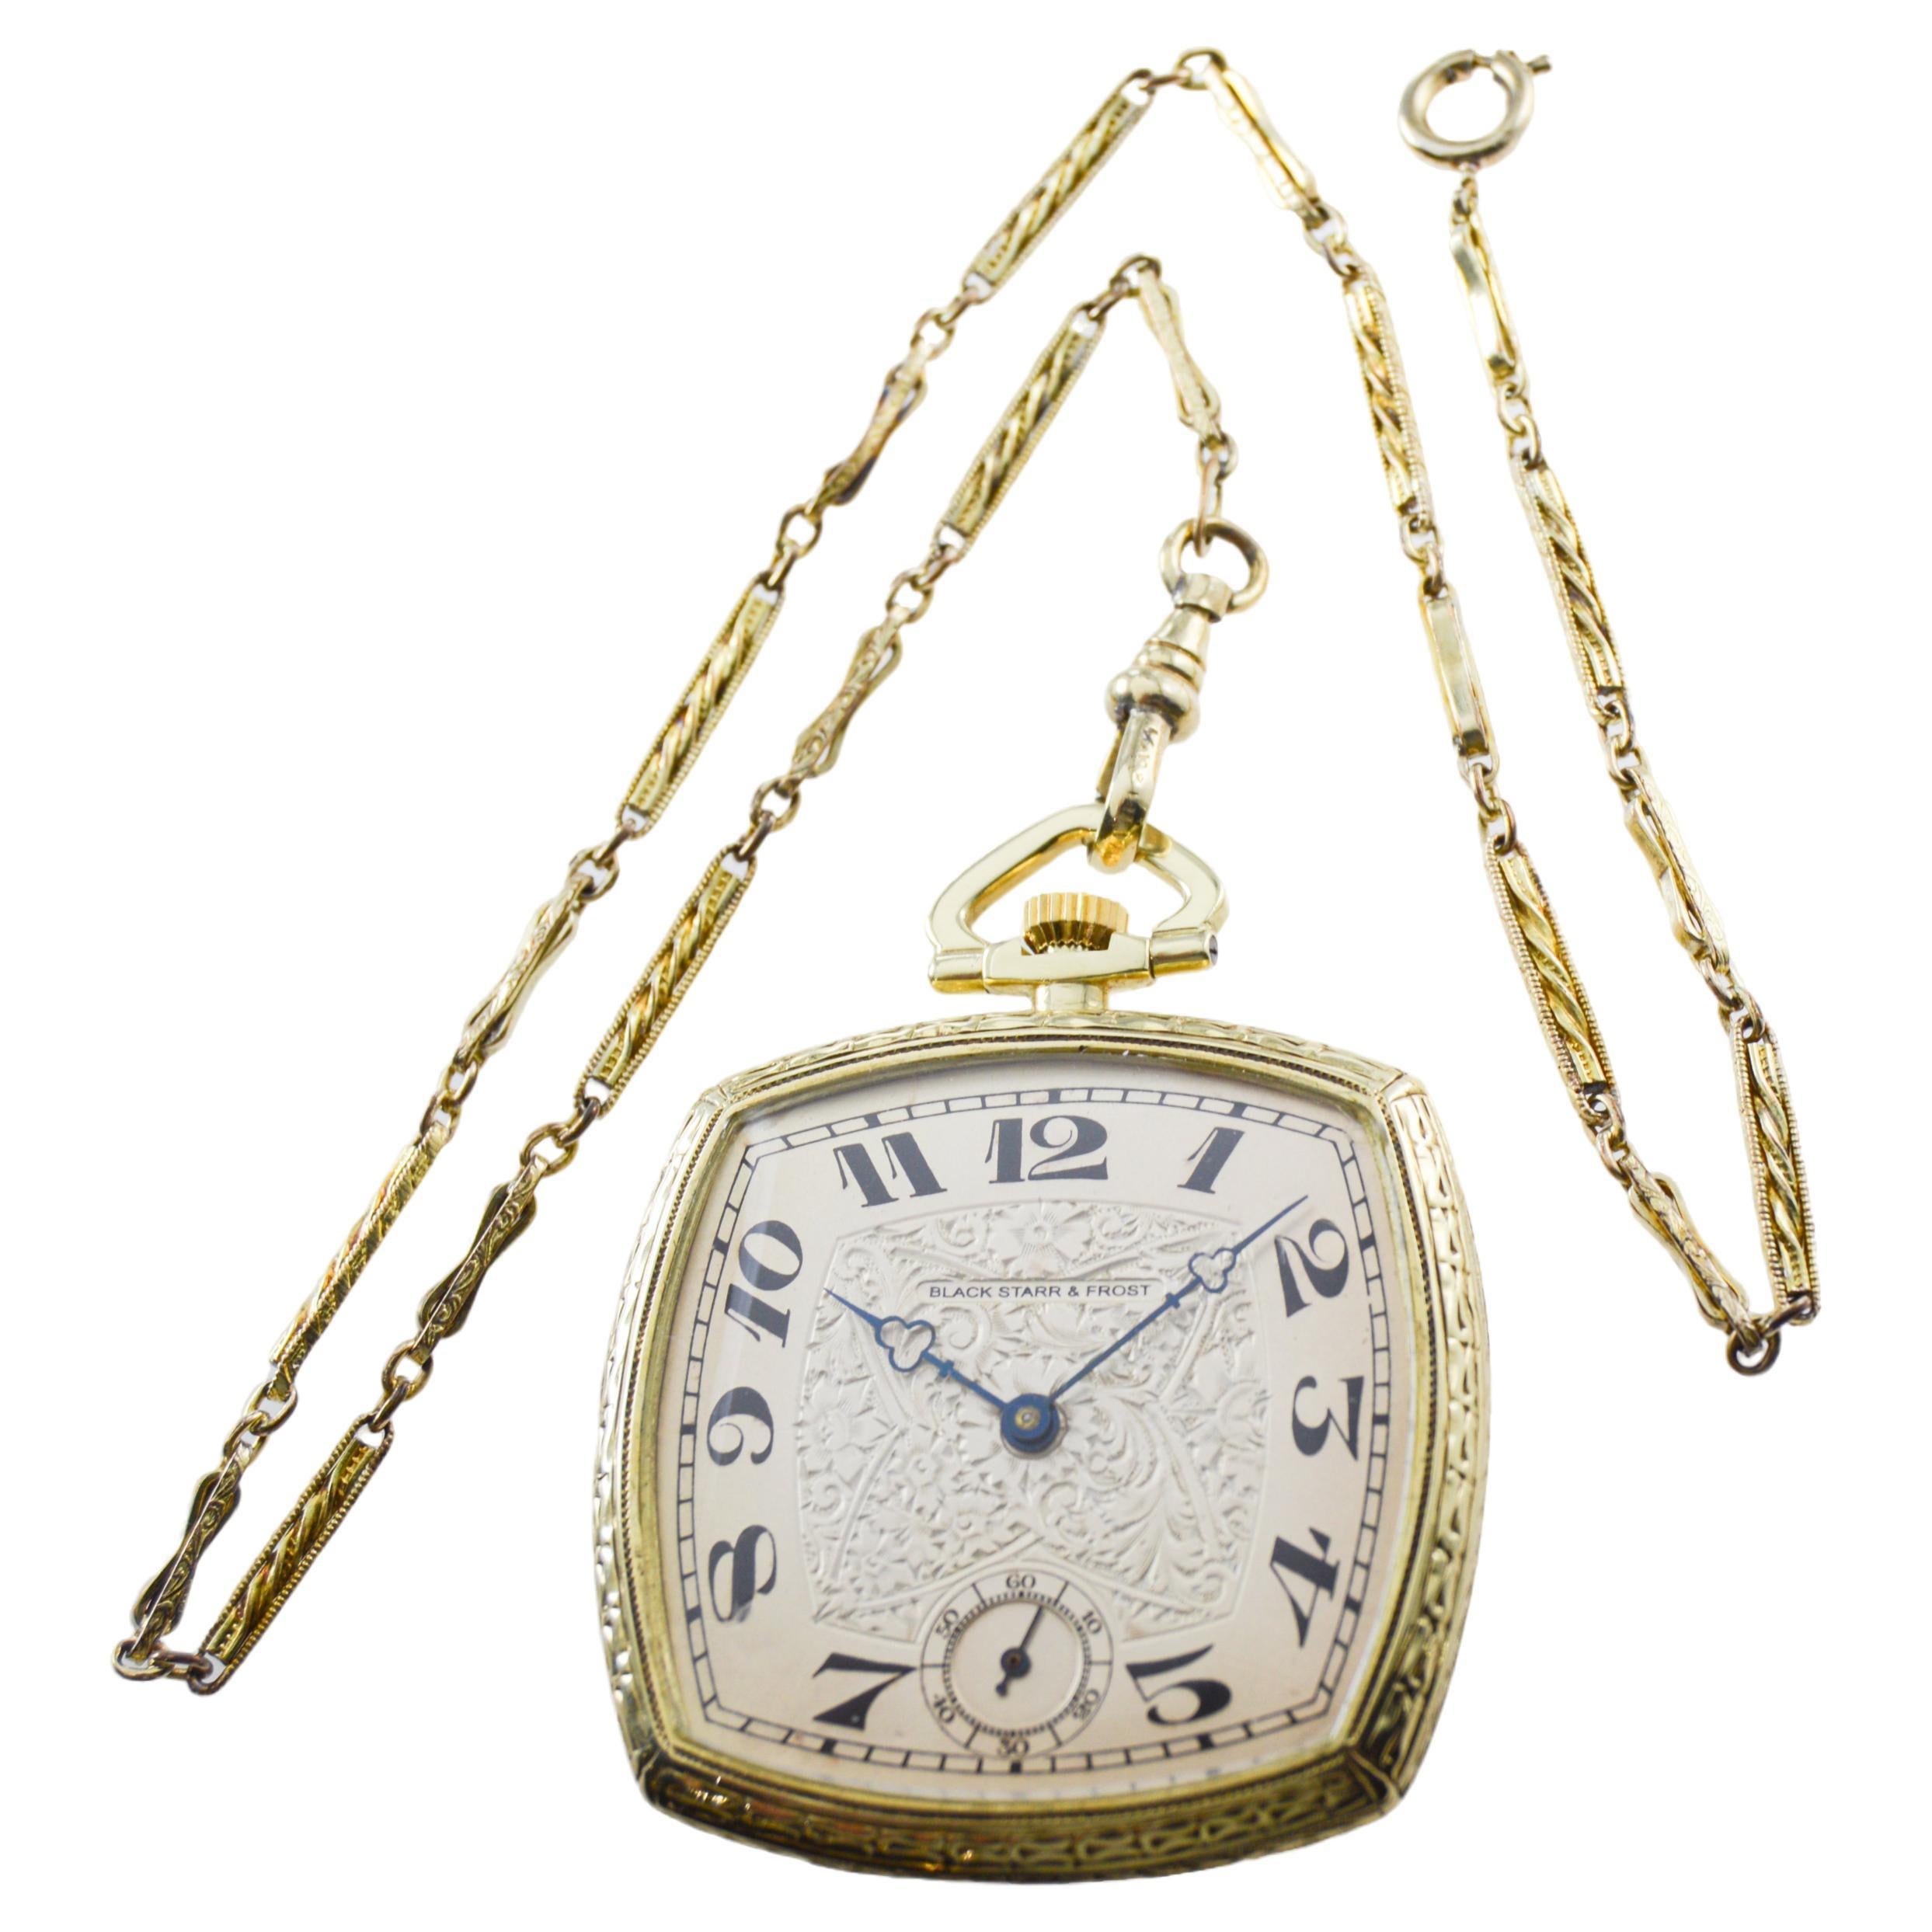 Black Starr & Frost 14 Karat Gold Art Deco Pocket Watch with Engraved Dial  In Excellent Condition For Sale In Long Beach, CA